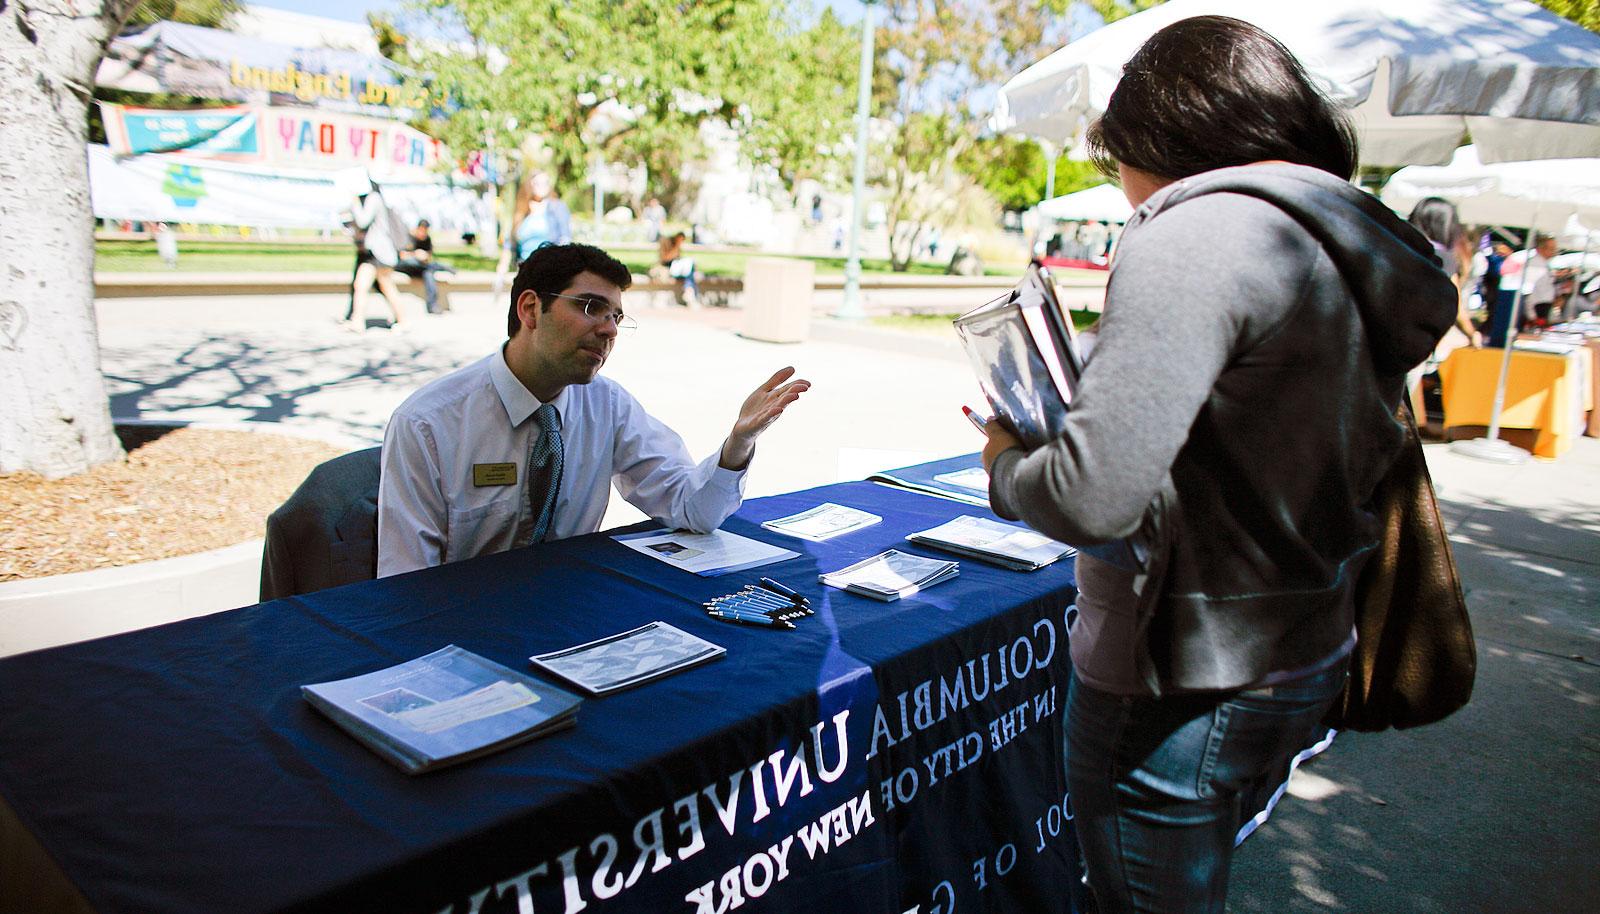 A student speaks with a representative from Columbia University.